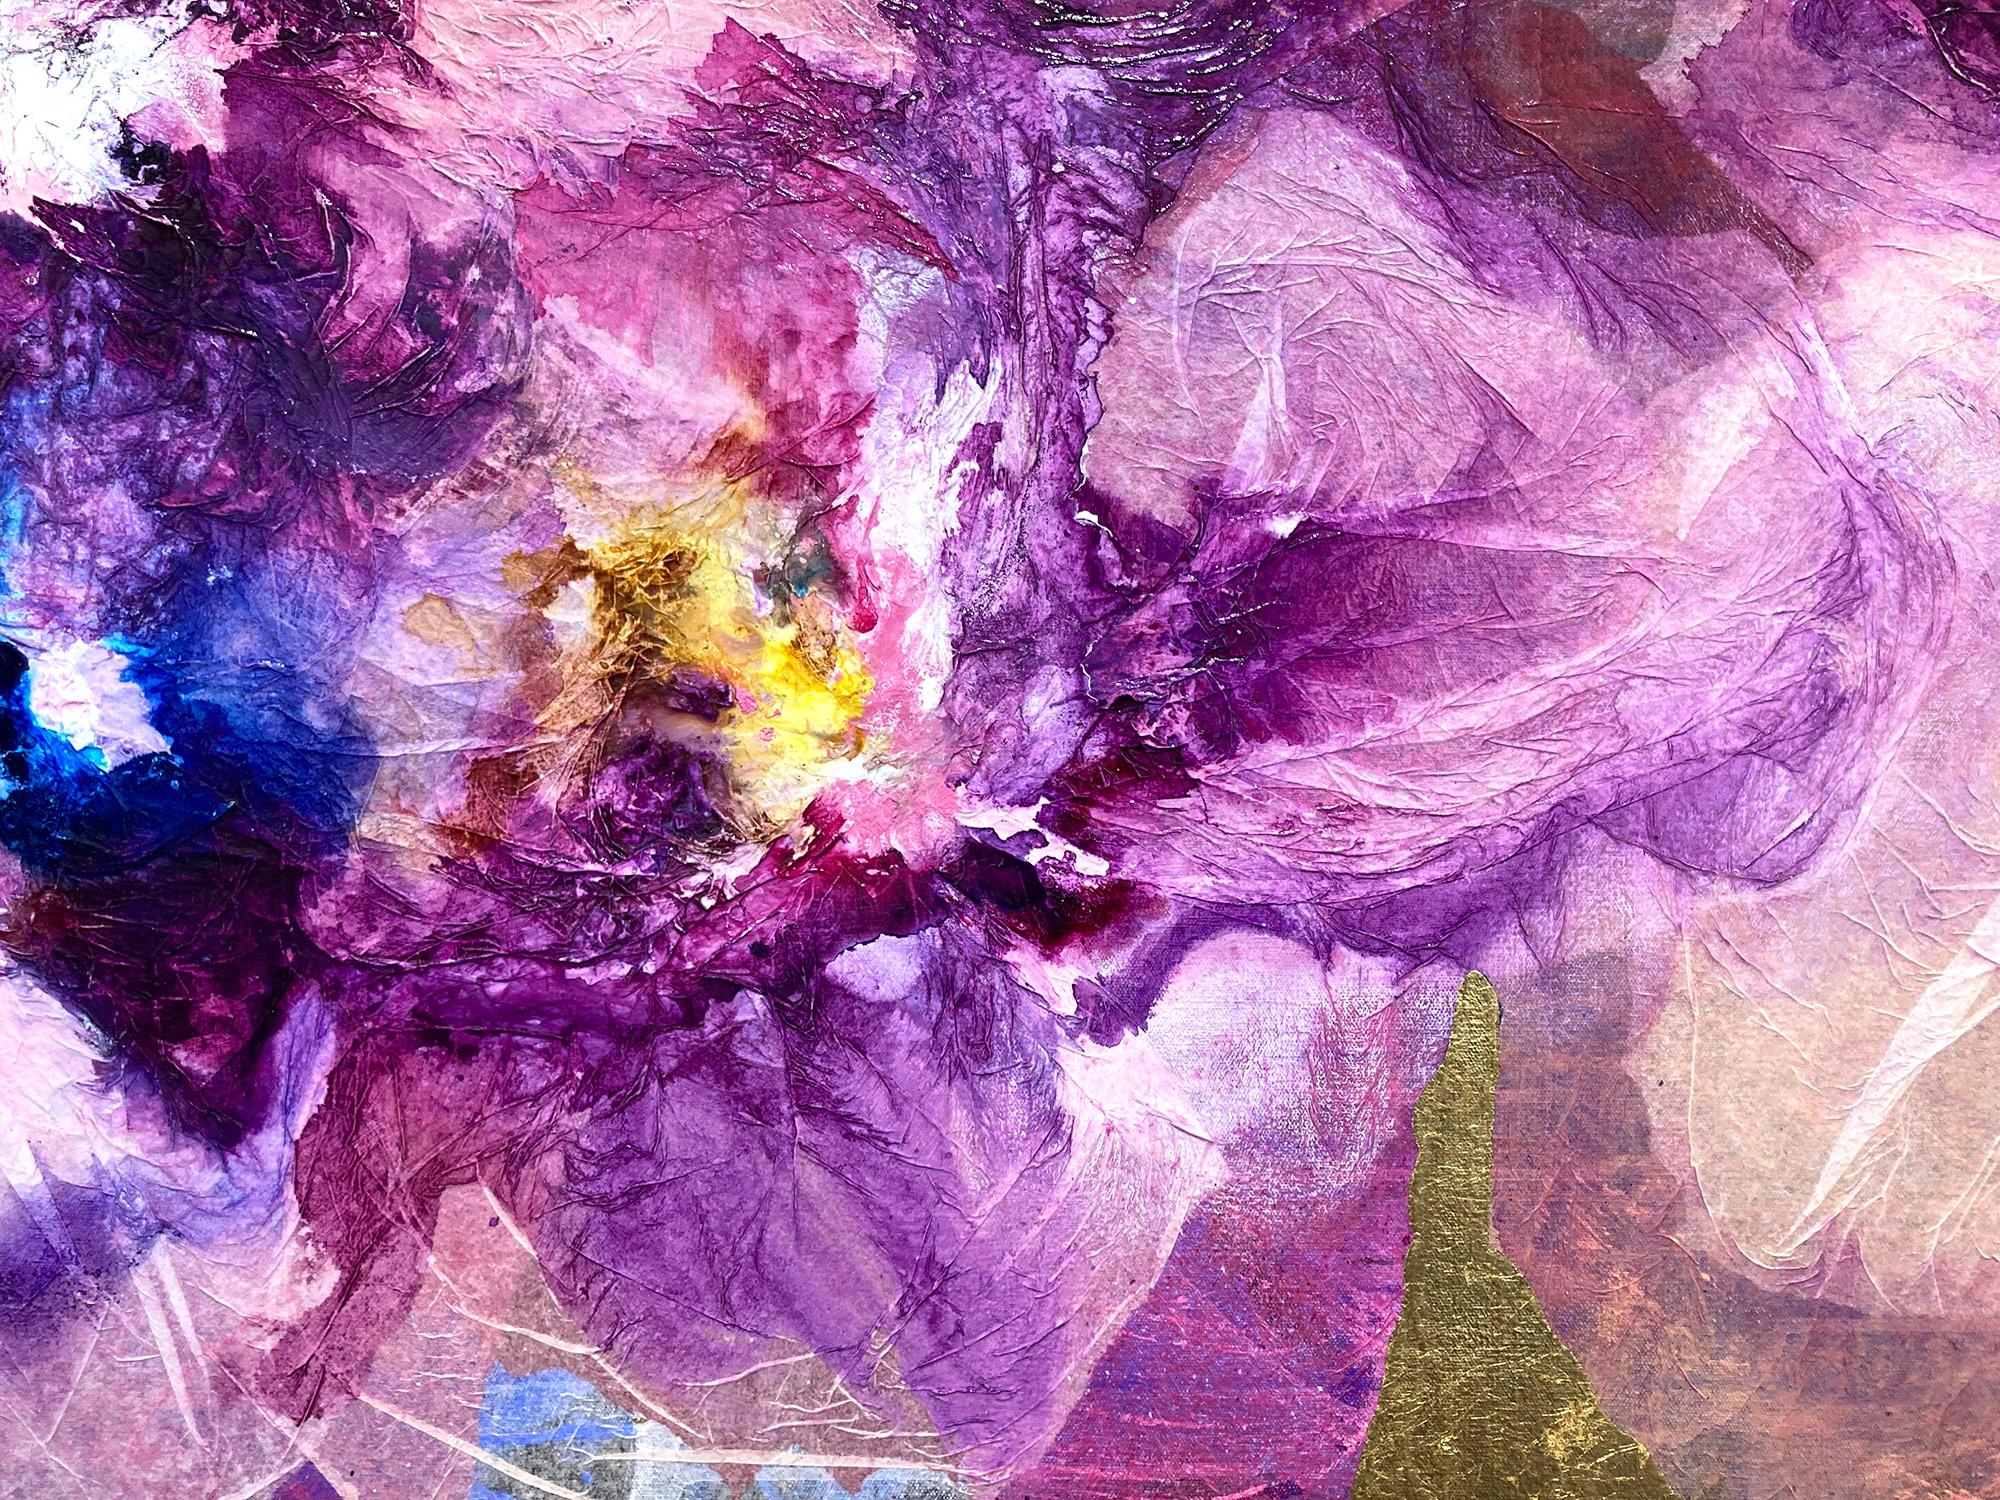 This painting by Antoinette is a stylish and luxurious mixed media on canvas piece depicting abstract flowers with bold use of color and contrast. The gold leaf background and the brilliant deep crimson and violets from the florals allows for the